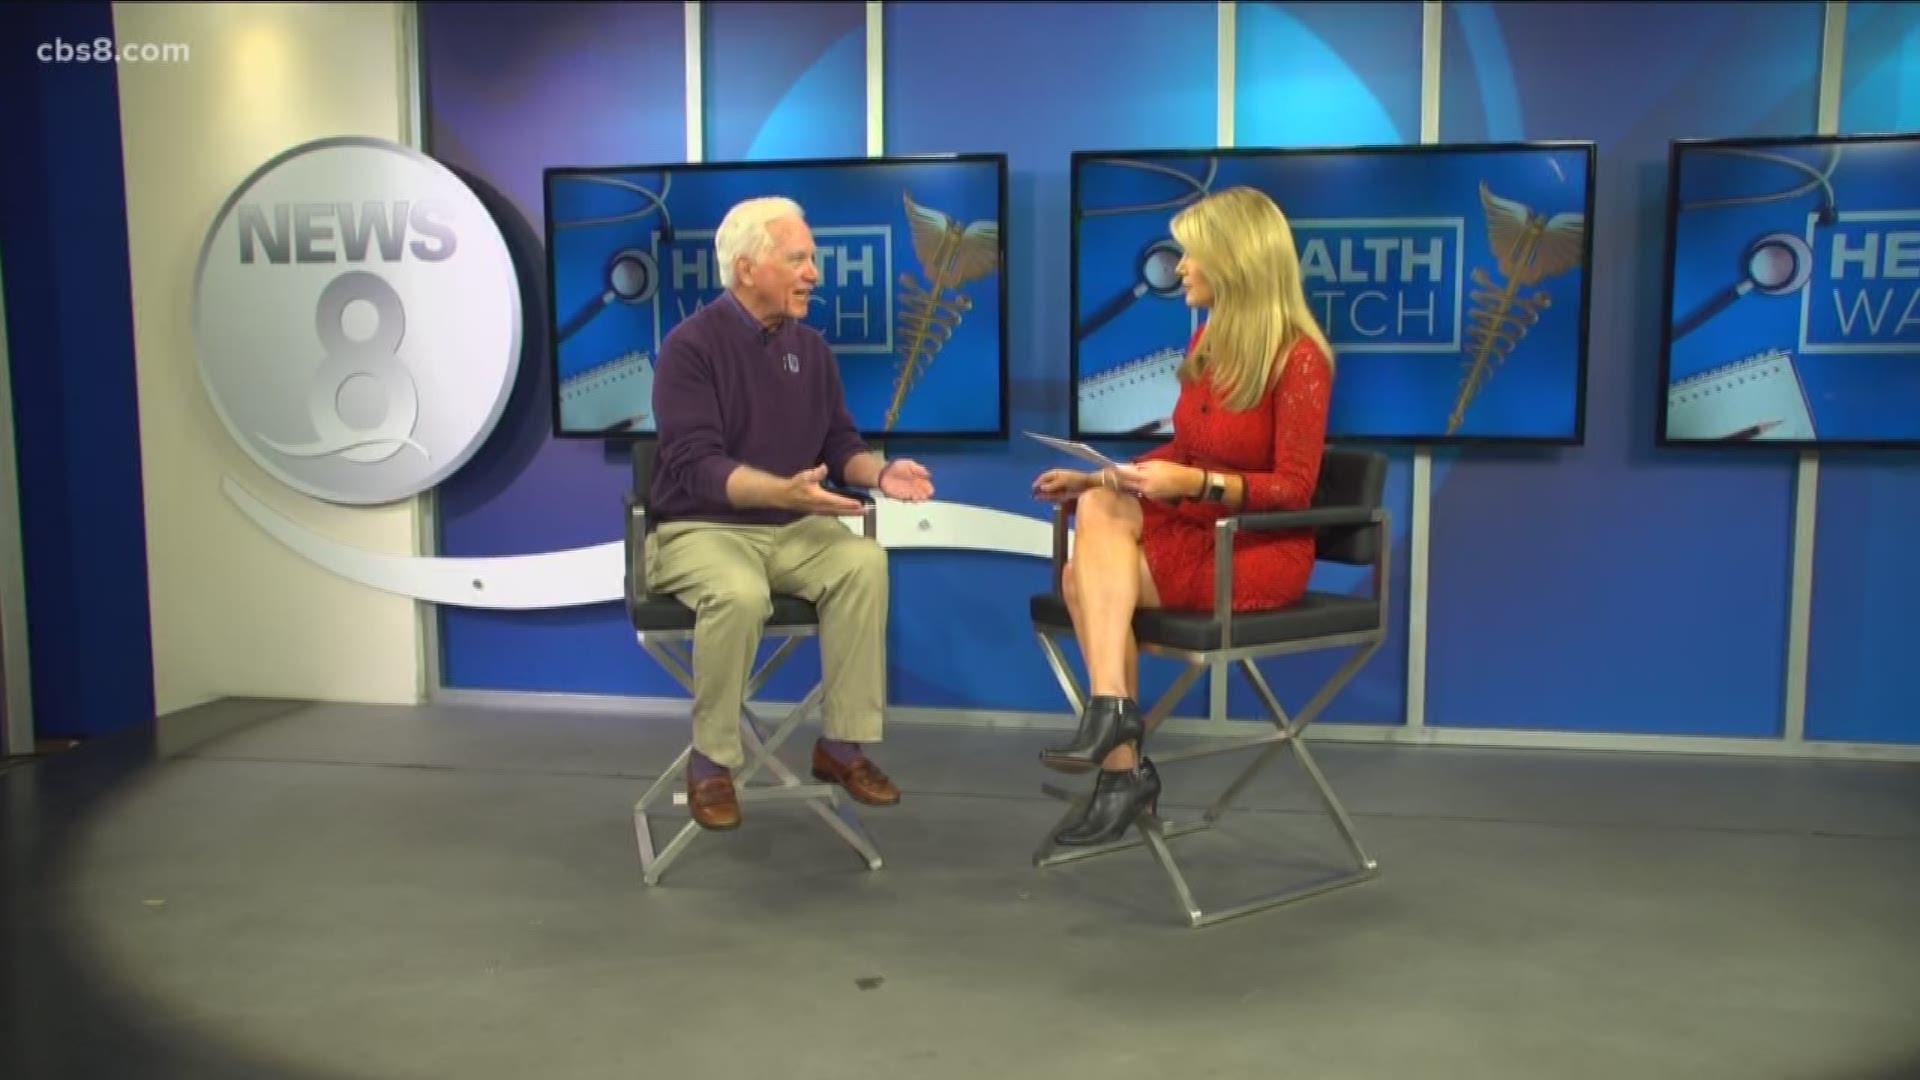 Pancreatic cancer survivor and San Diego Pancreatic Cancer Action Network board member, Stu Rickerson, joined News 8 to talk about the importance of clinical trials.